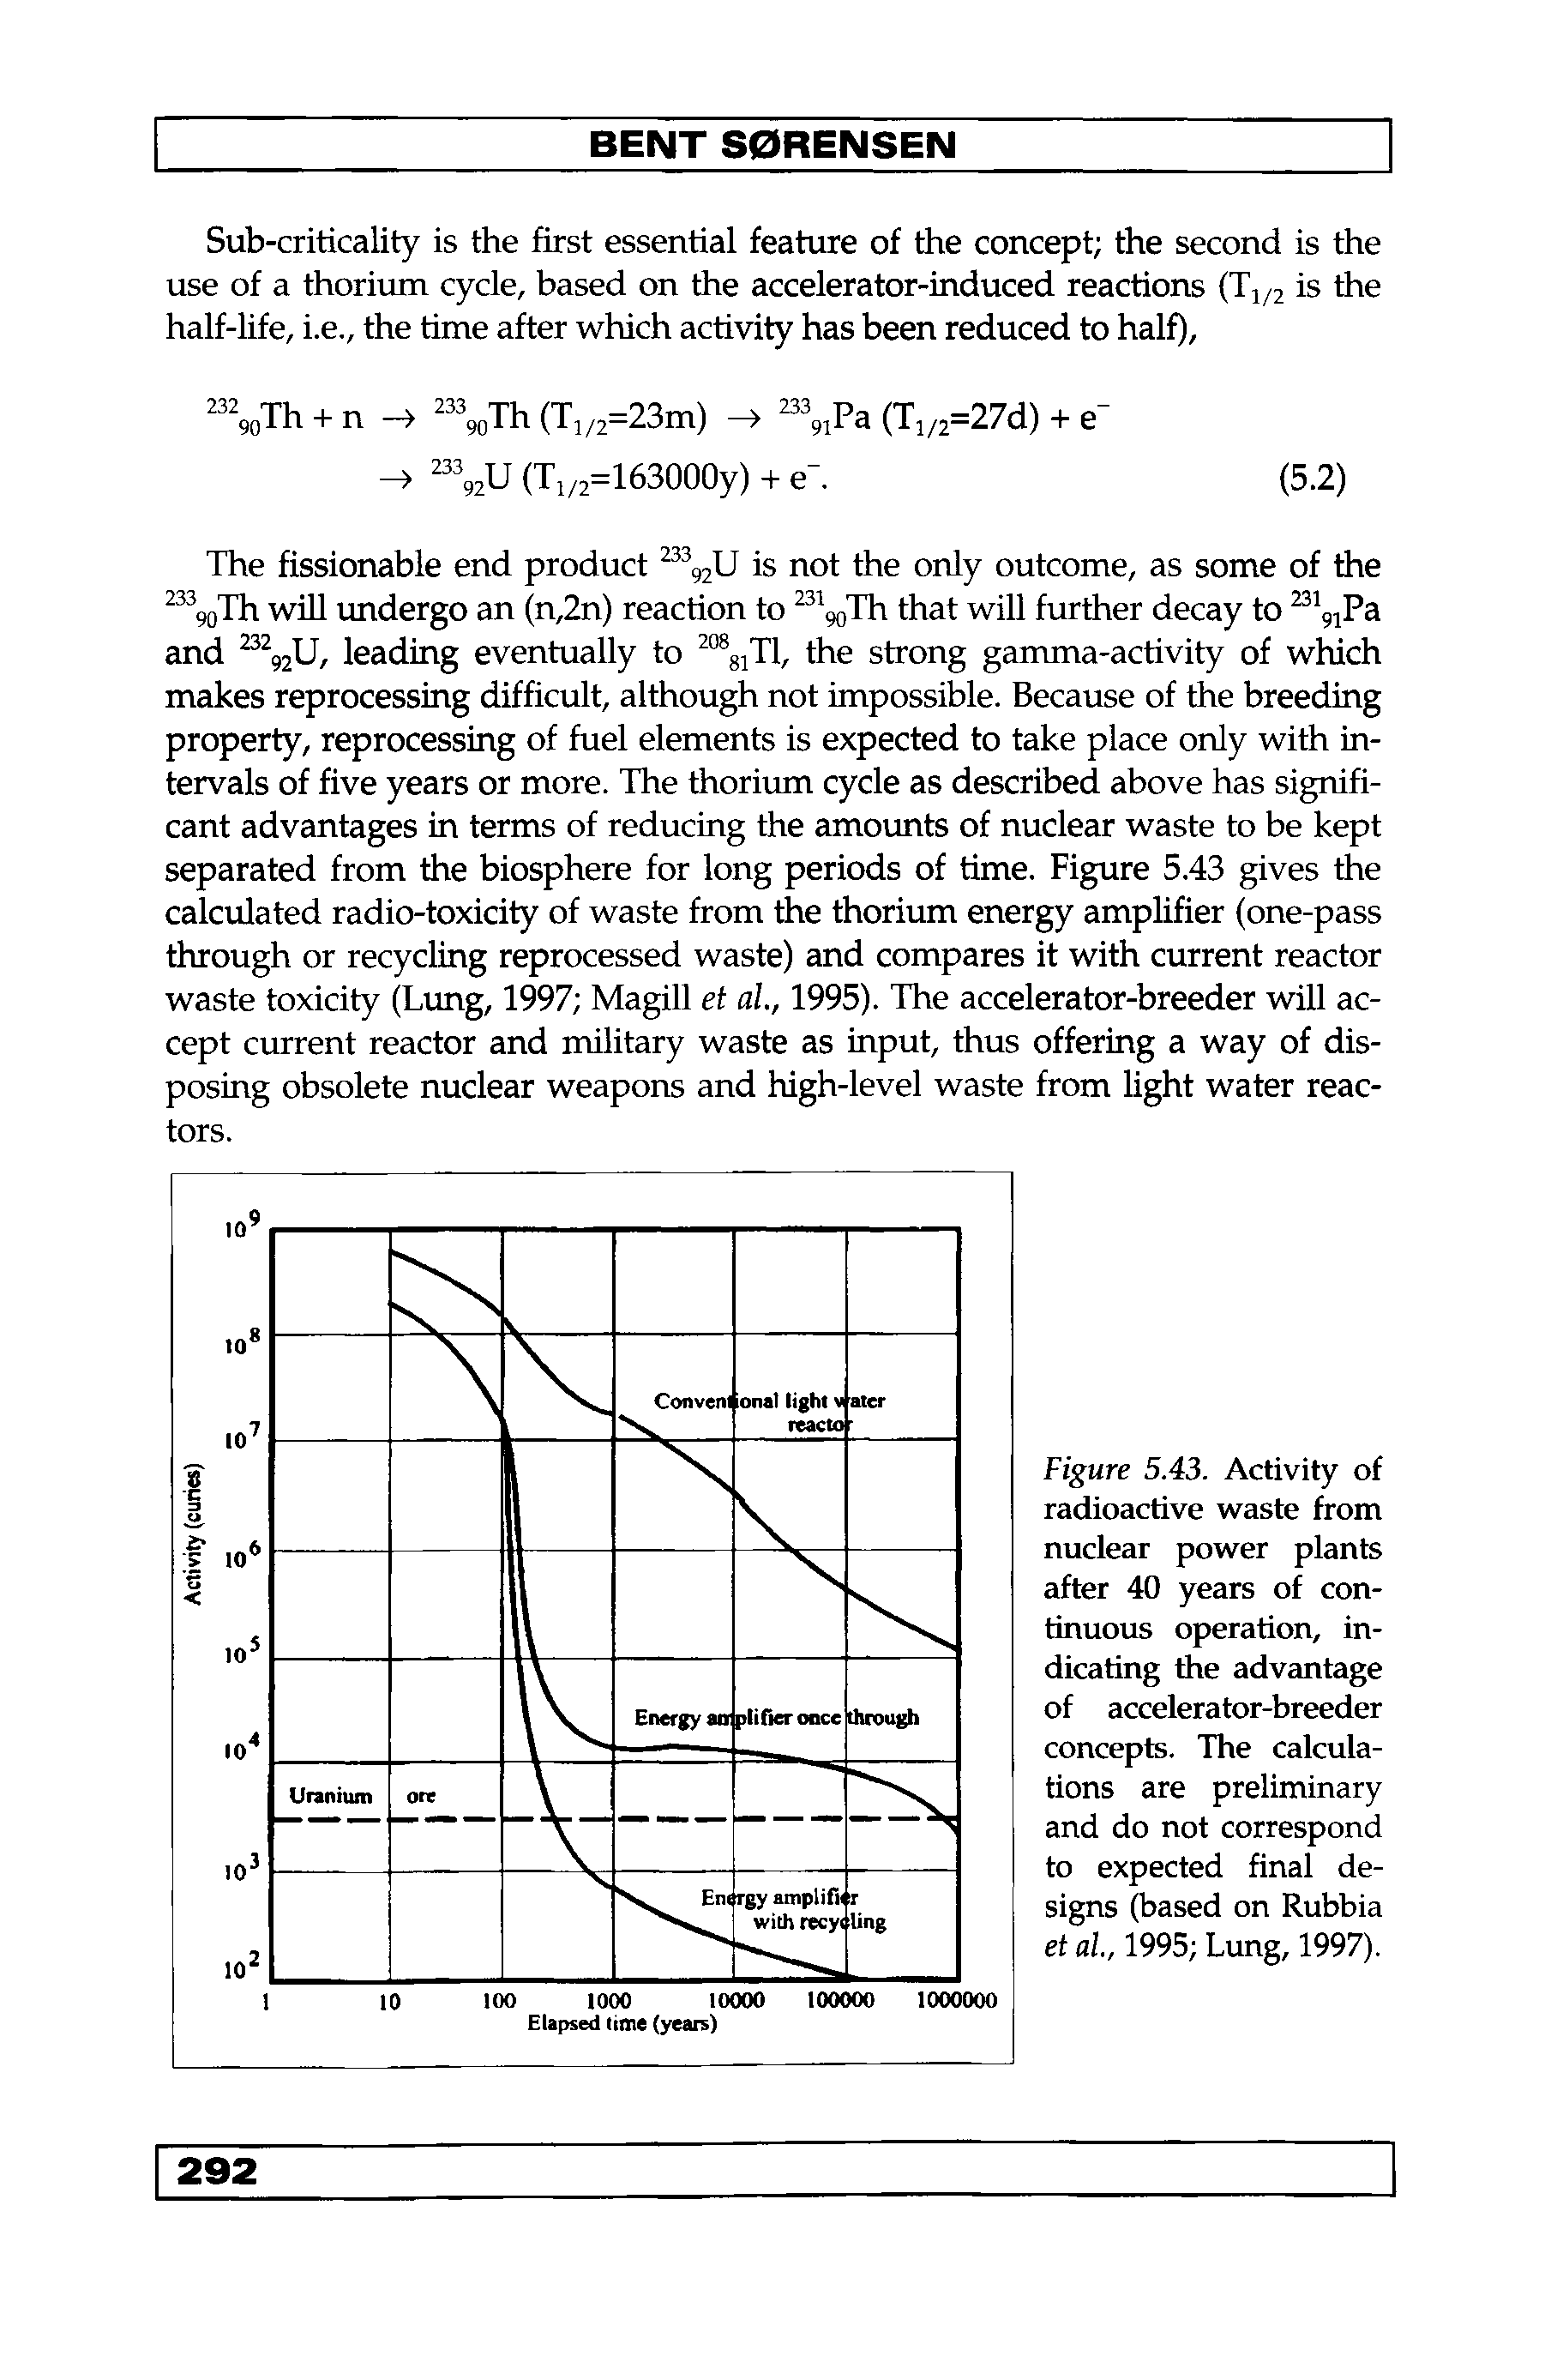 Figure 5.43. Activity of radioactive waste from nuclear power plants after 40 years of continuous operation, indicating the advantage of accelerator-breeder concepts. The calculations are preliminary and do not correspond to expected final designs (based on Rubbia etal., 1995 Lung, 1997).